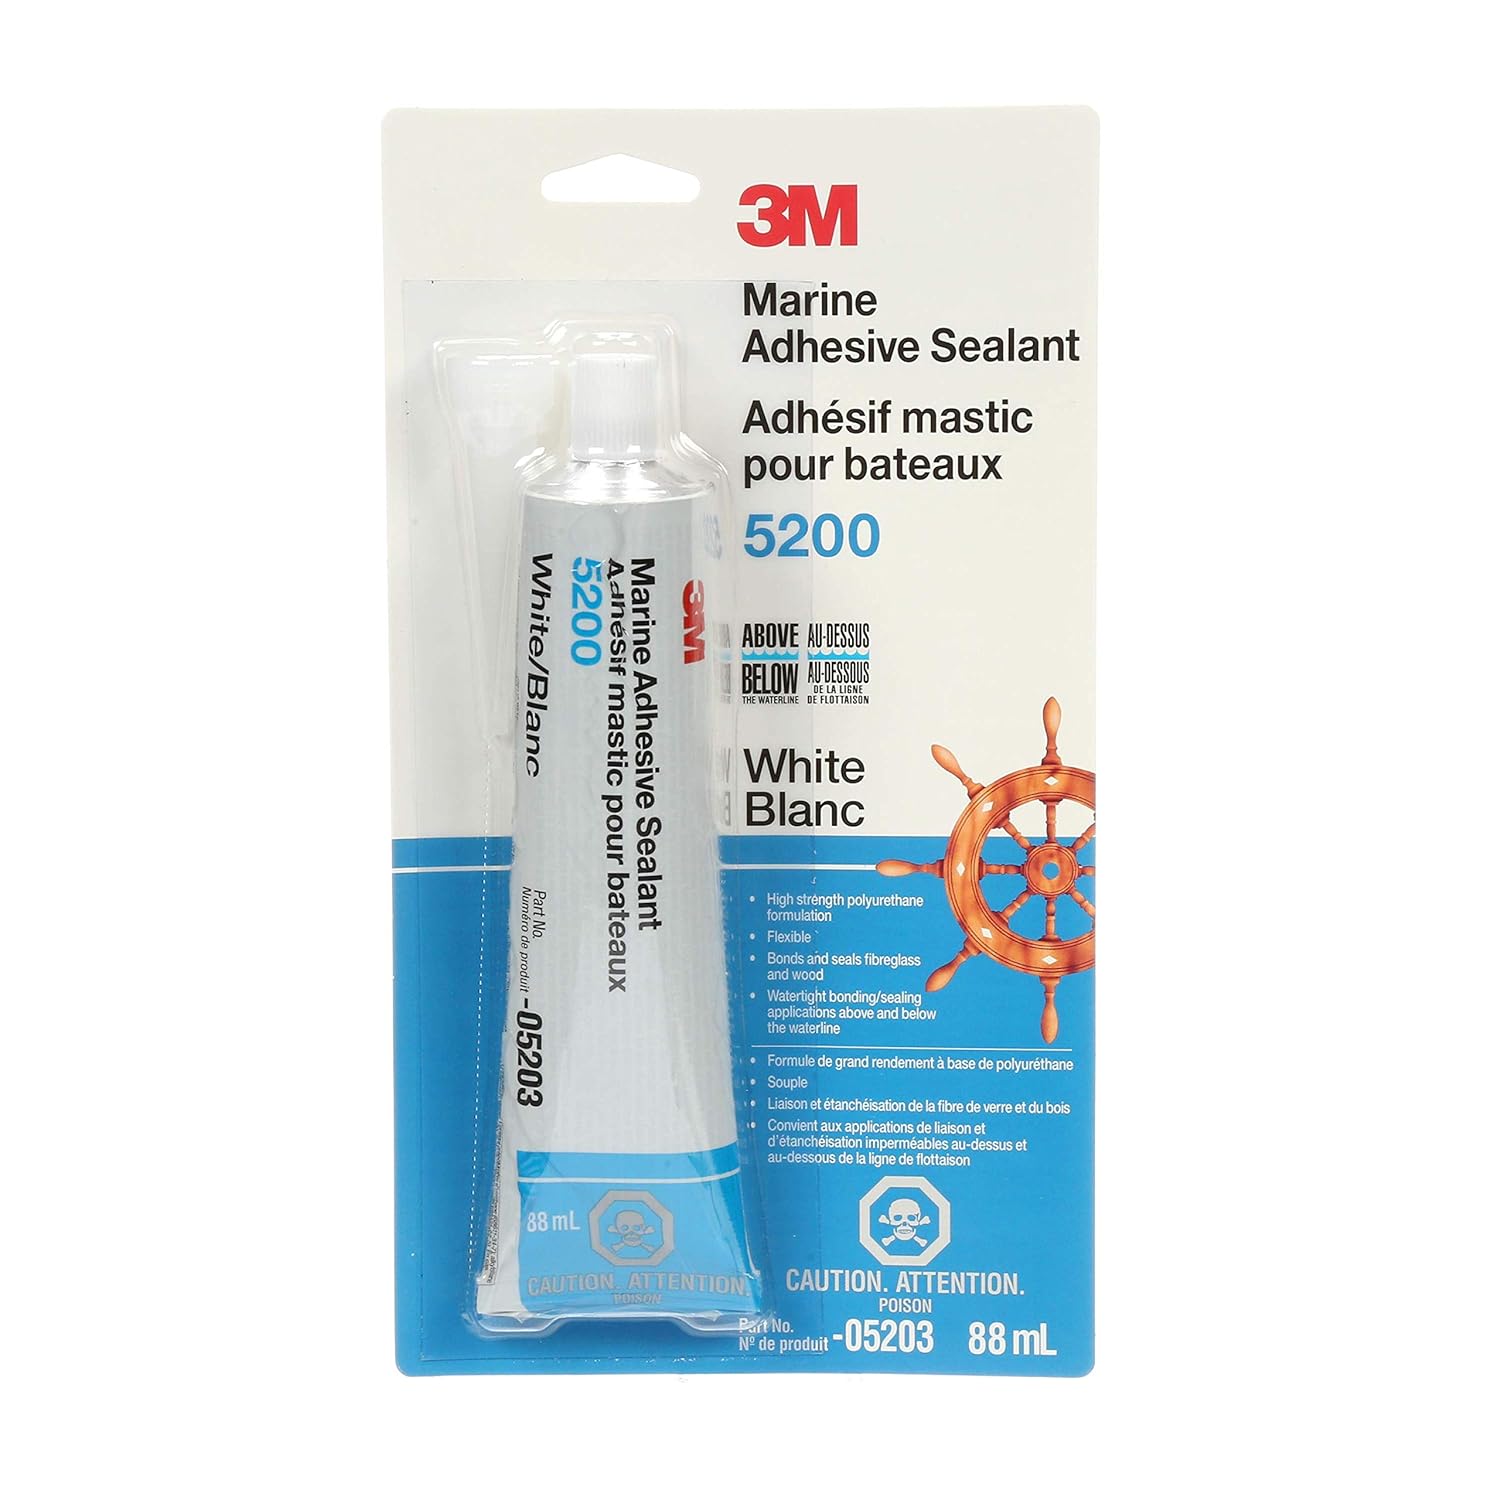 Generic 3M Marine Adhesive Sealant 5200 (05203) Permanent Bonding and Sealing for Boats and RVs Above and Below the Waterline Waterproo